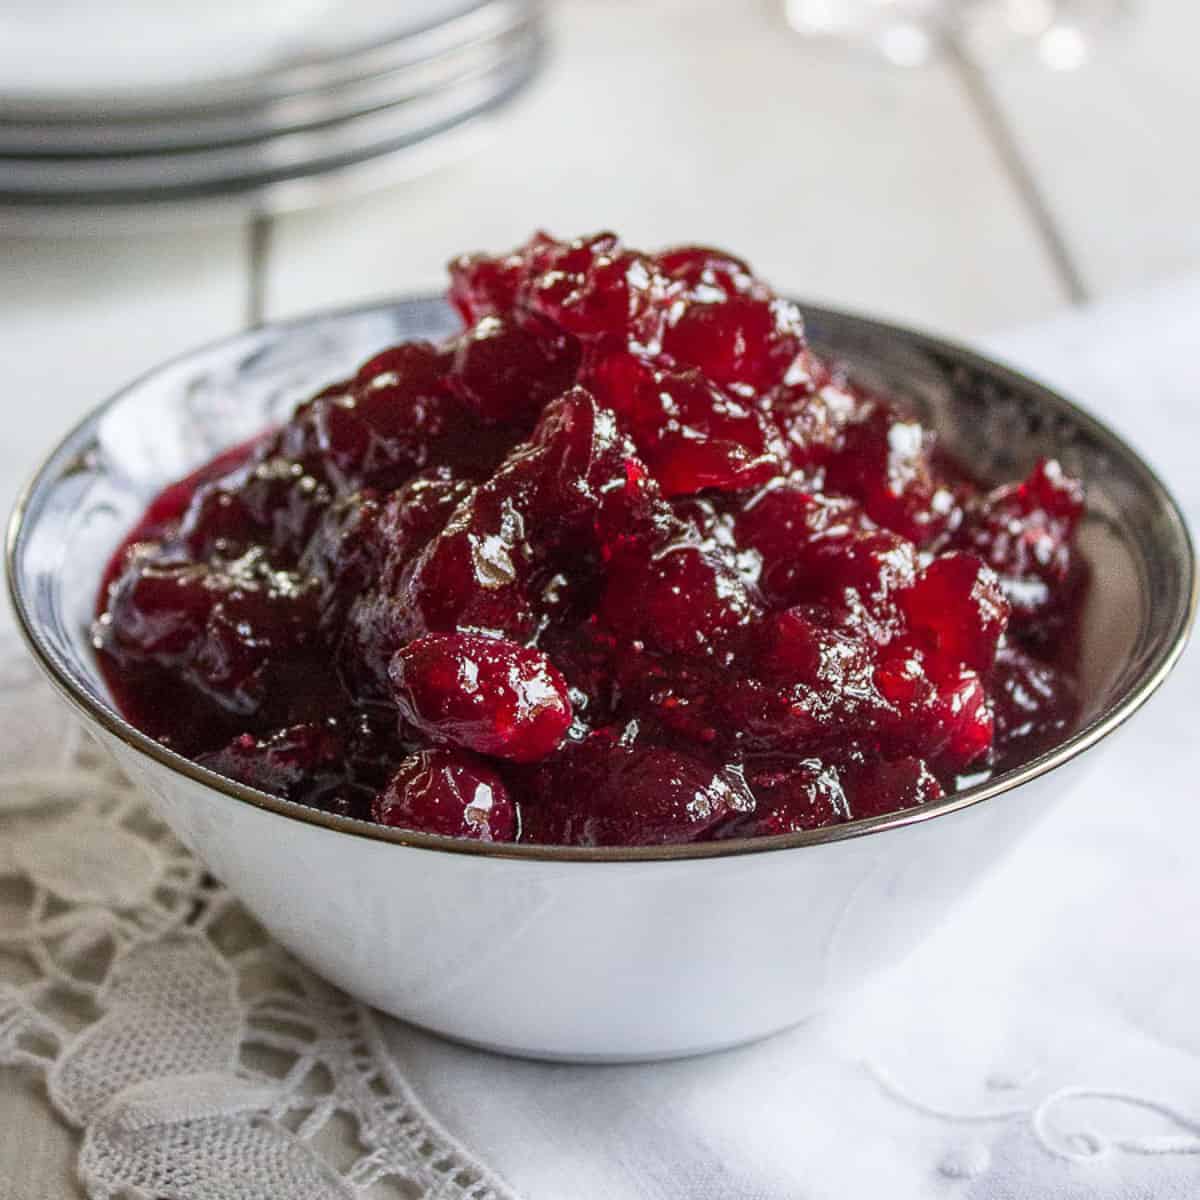 Cranberry sauce in a white china dish on top of a white napkin.